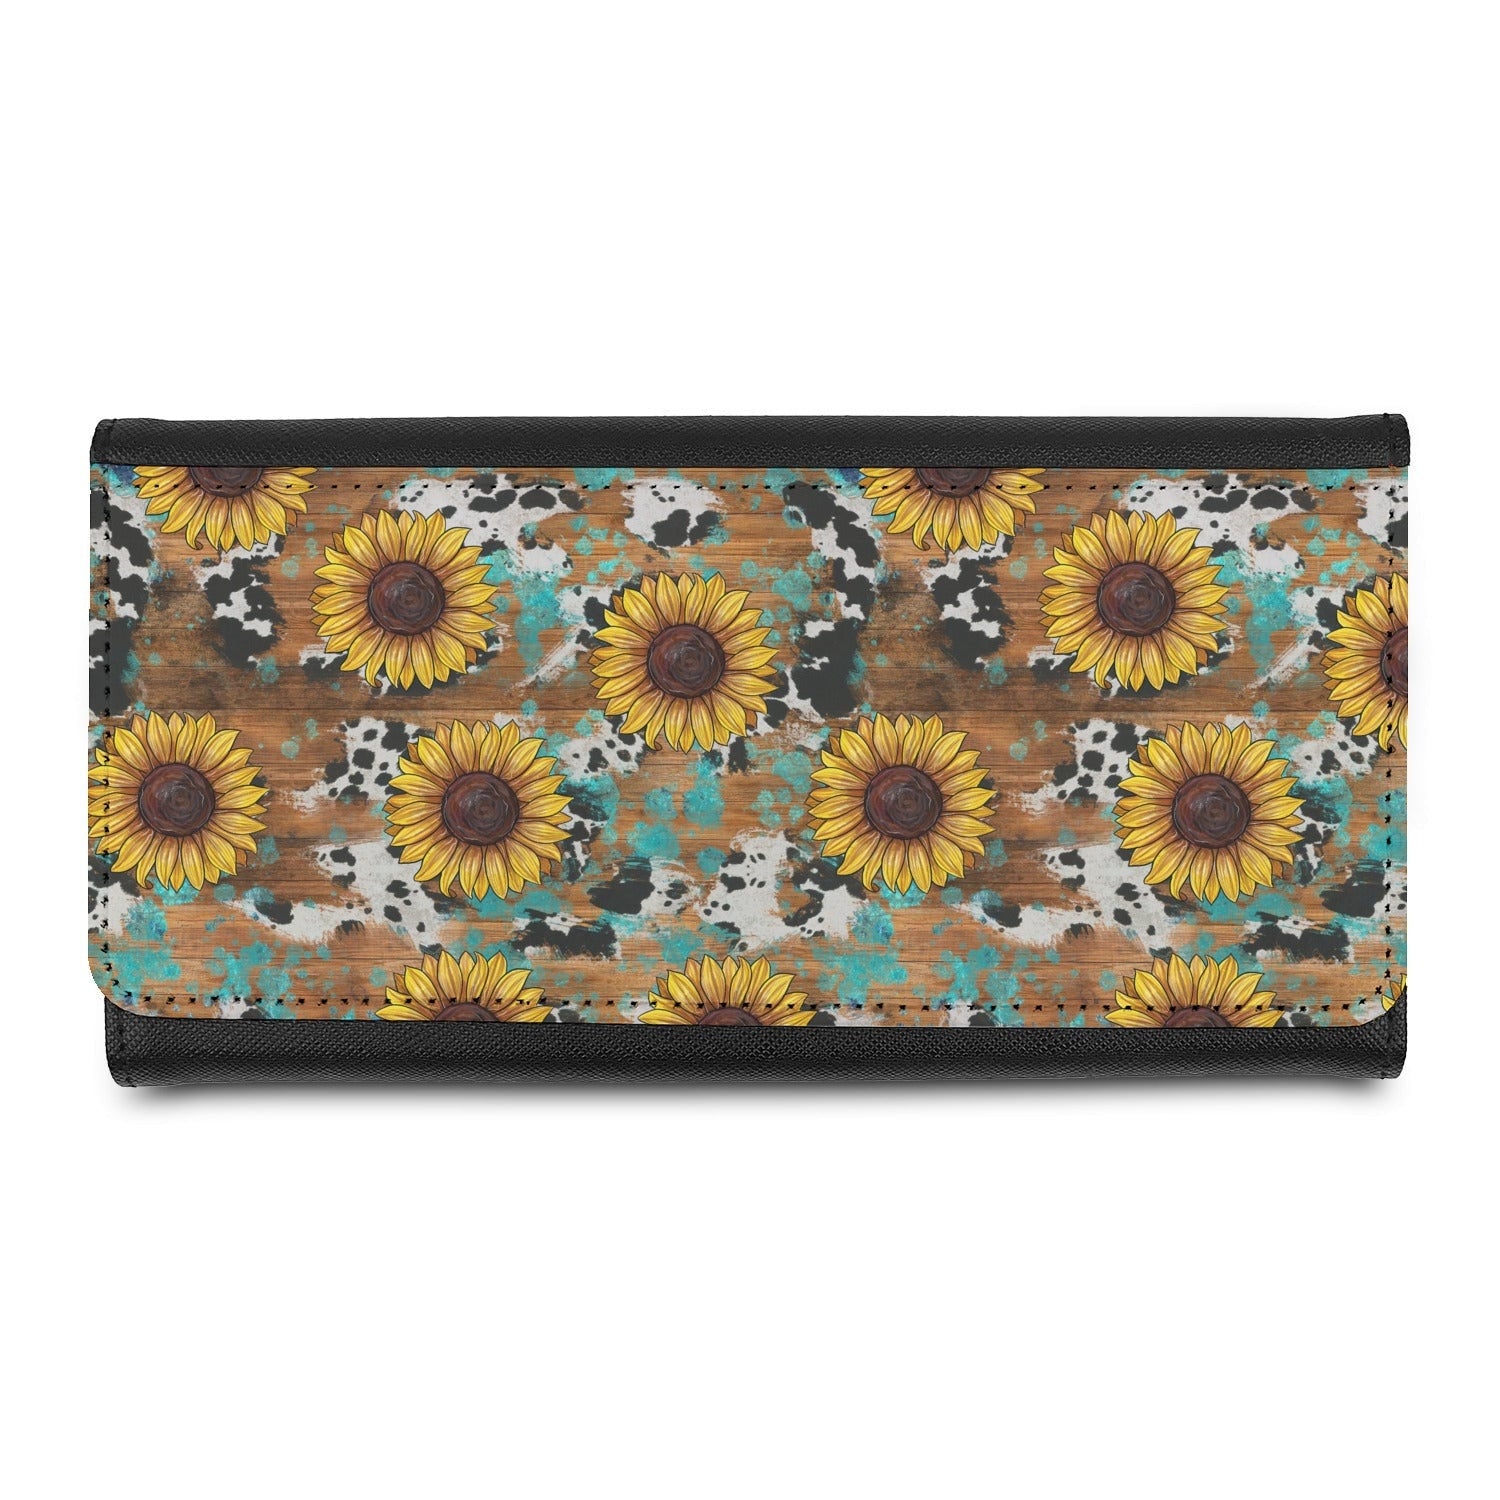 Western Sunflowers Print/Personalize It!/ Design Wallet